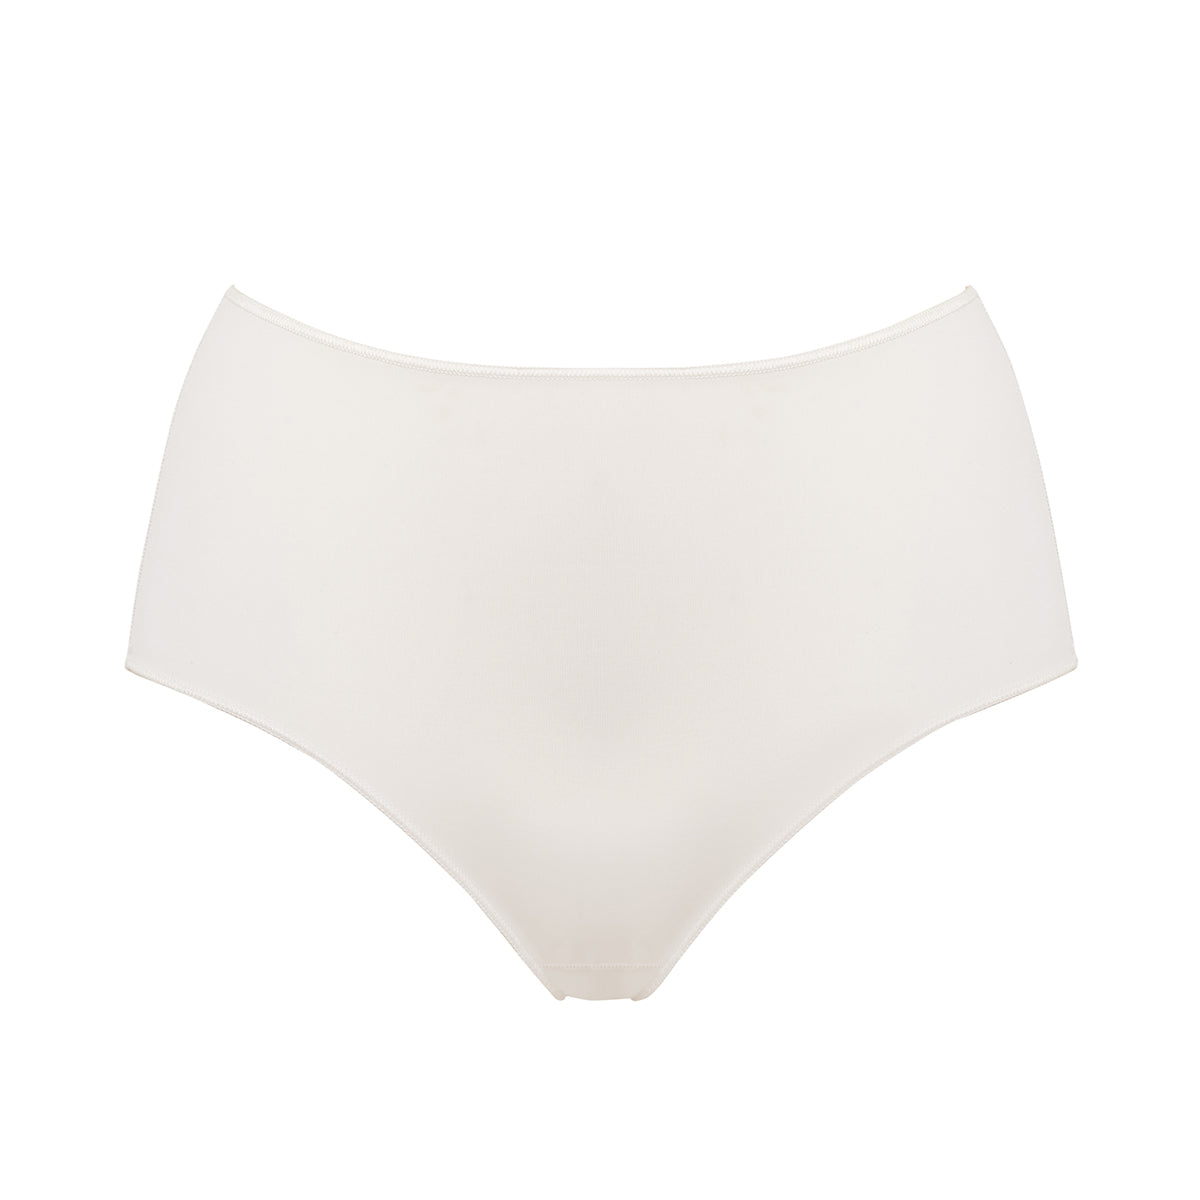 Maison Lejaby Paris Les Invisibles - High Waist Shaping Brief Knickers  (5303)